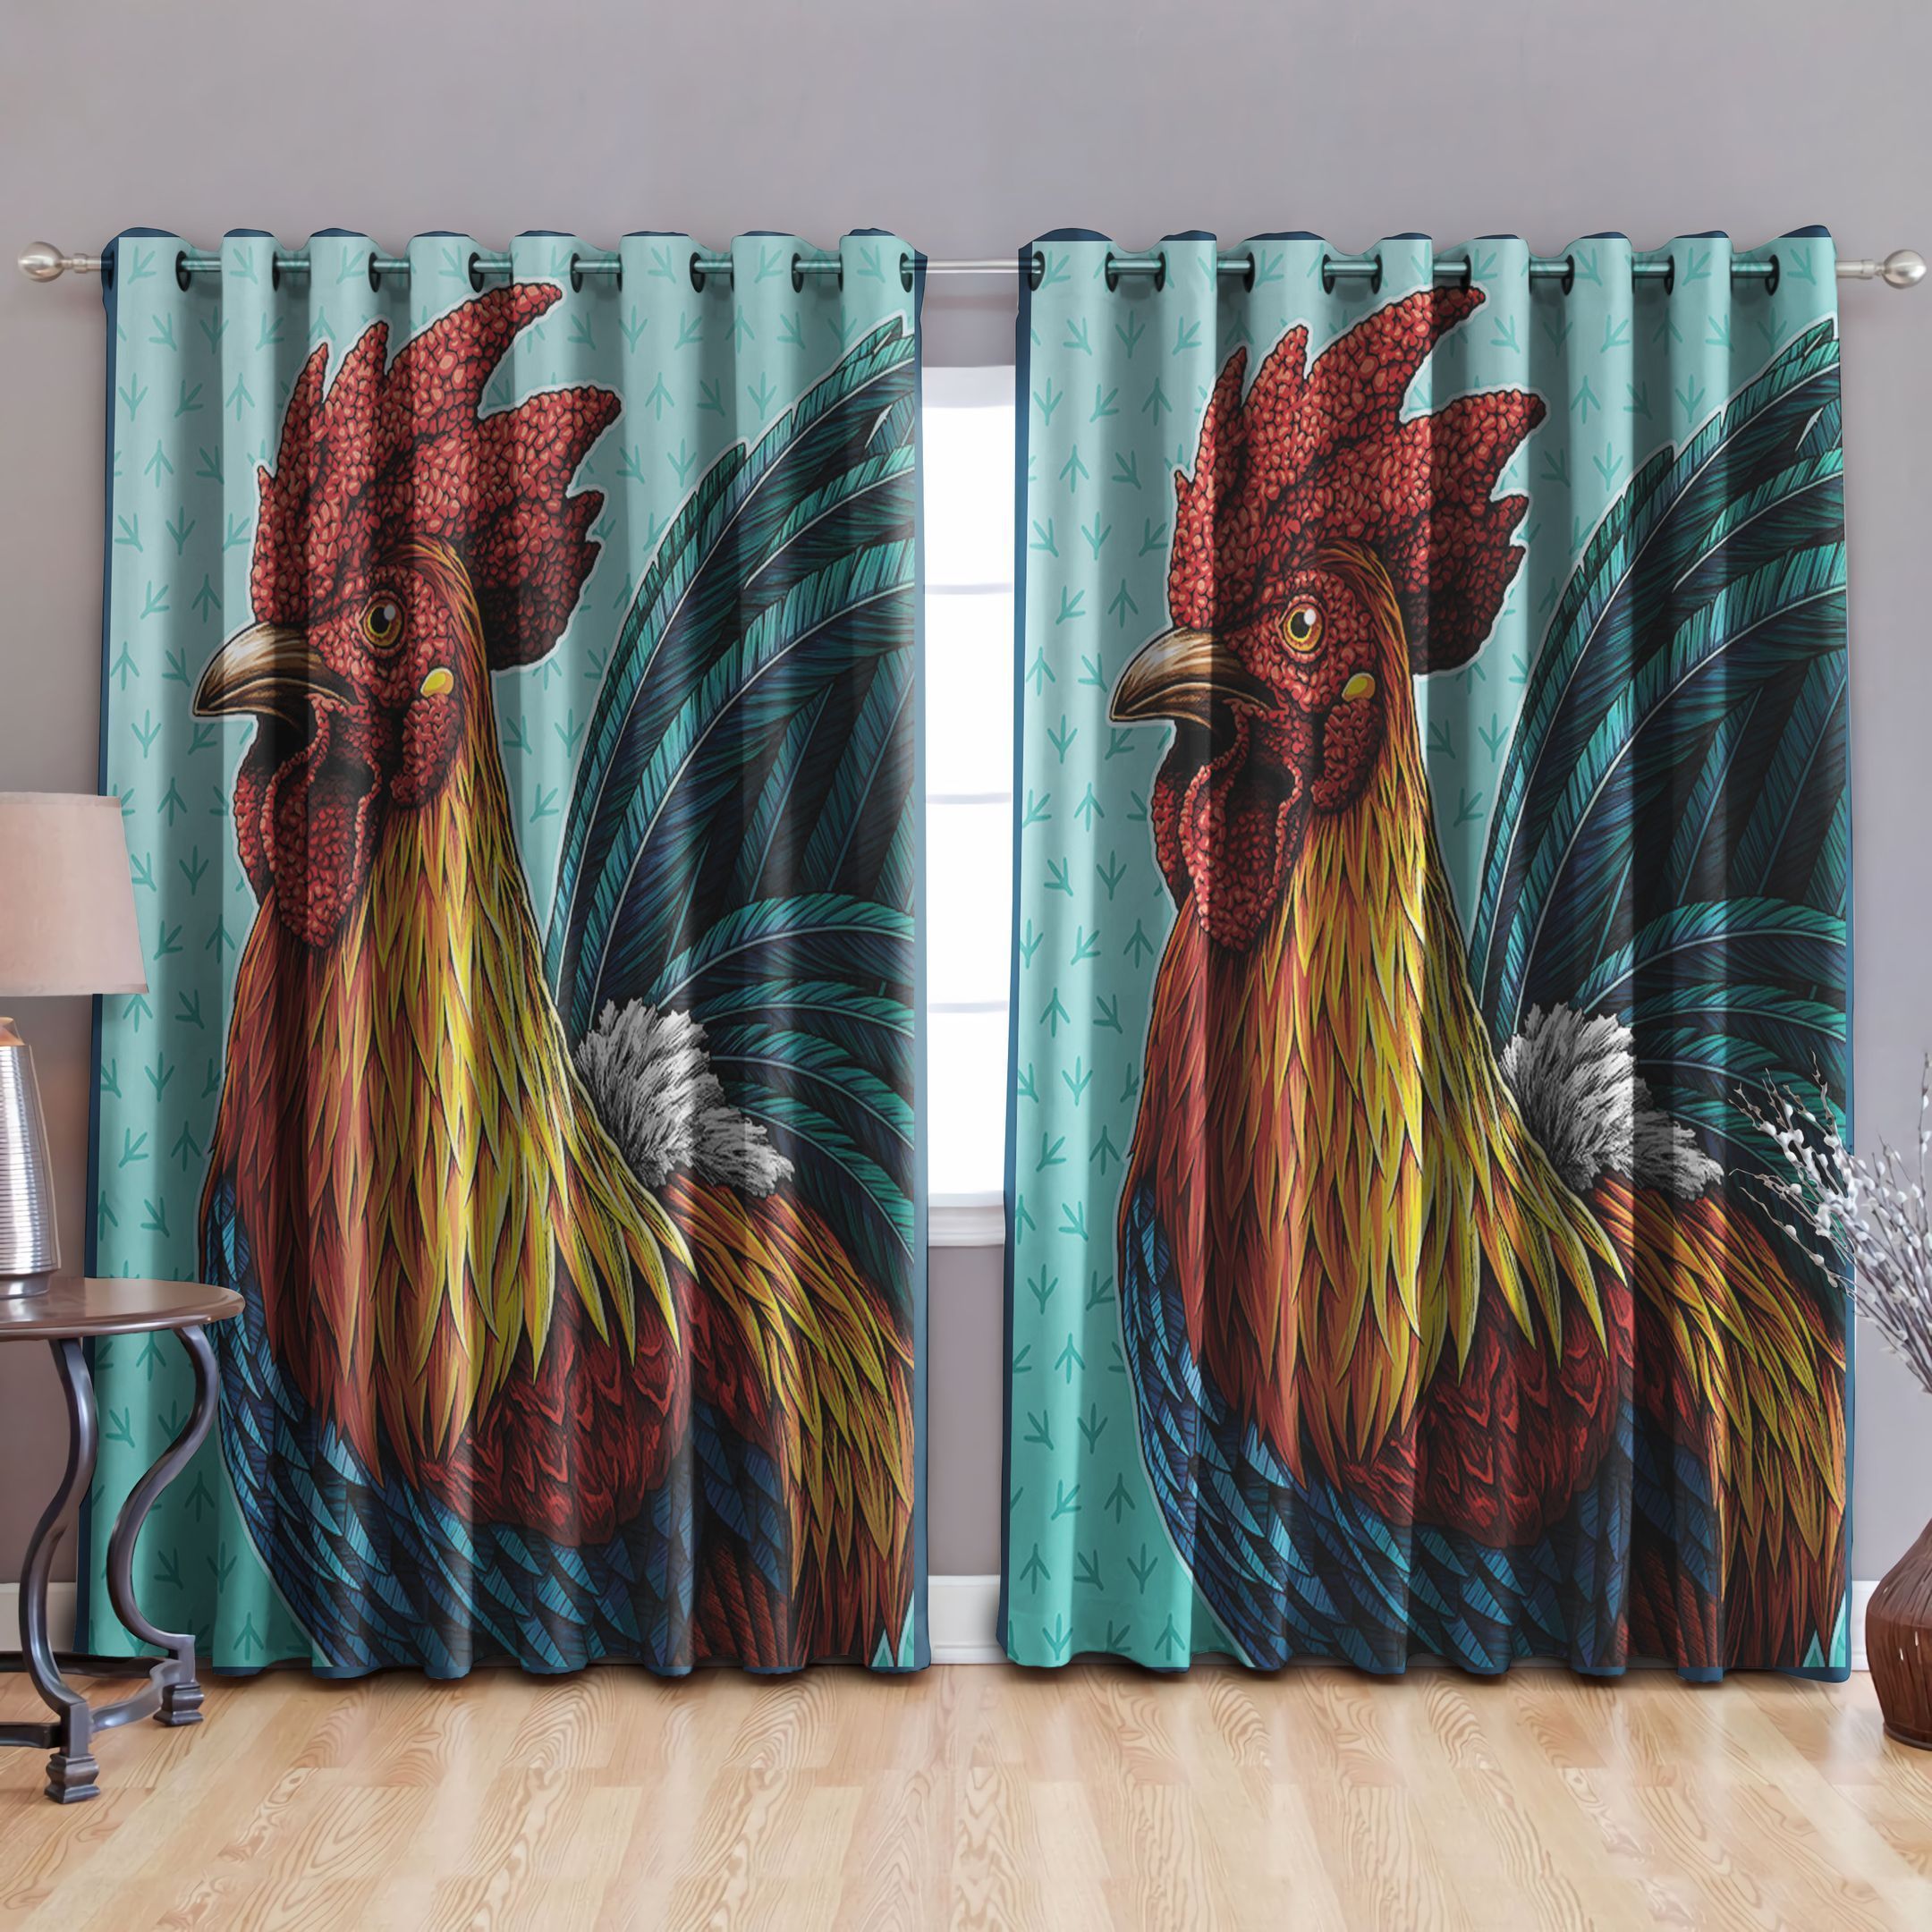 Rooster Printed Window Curtains Home Decor